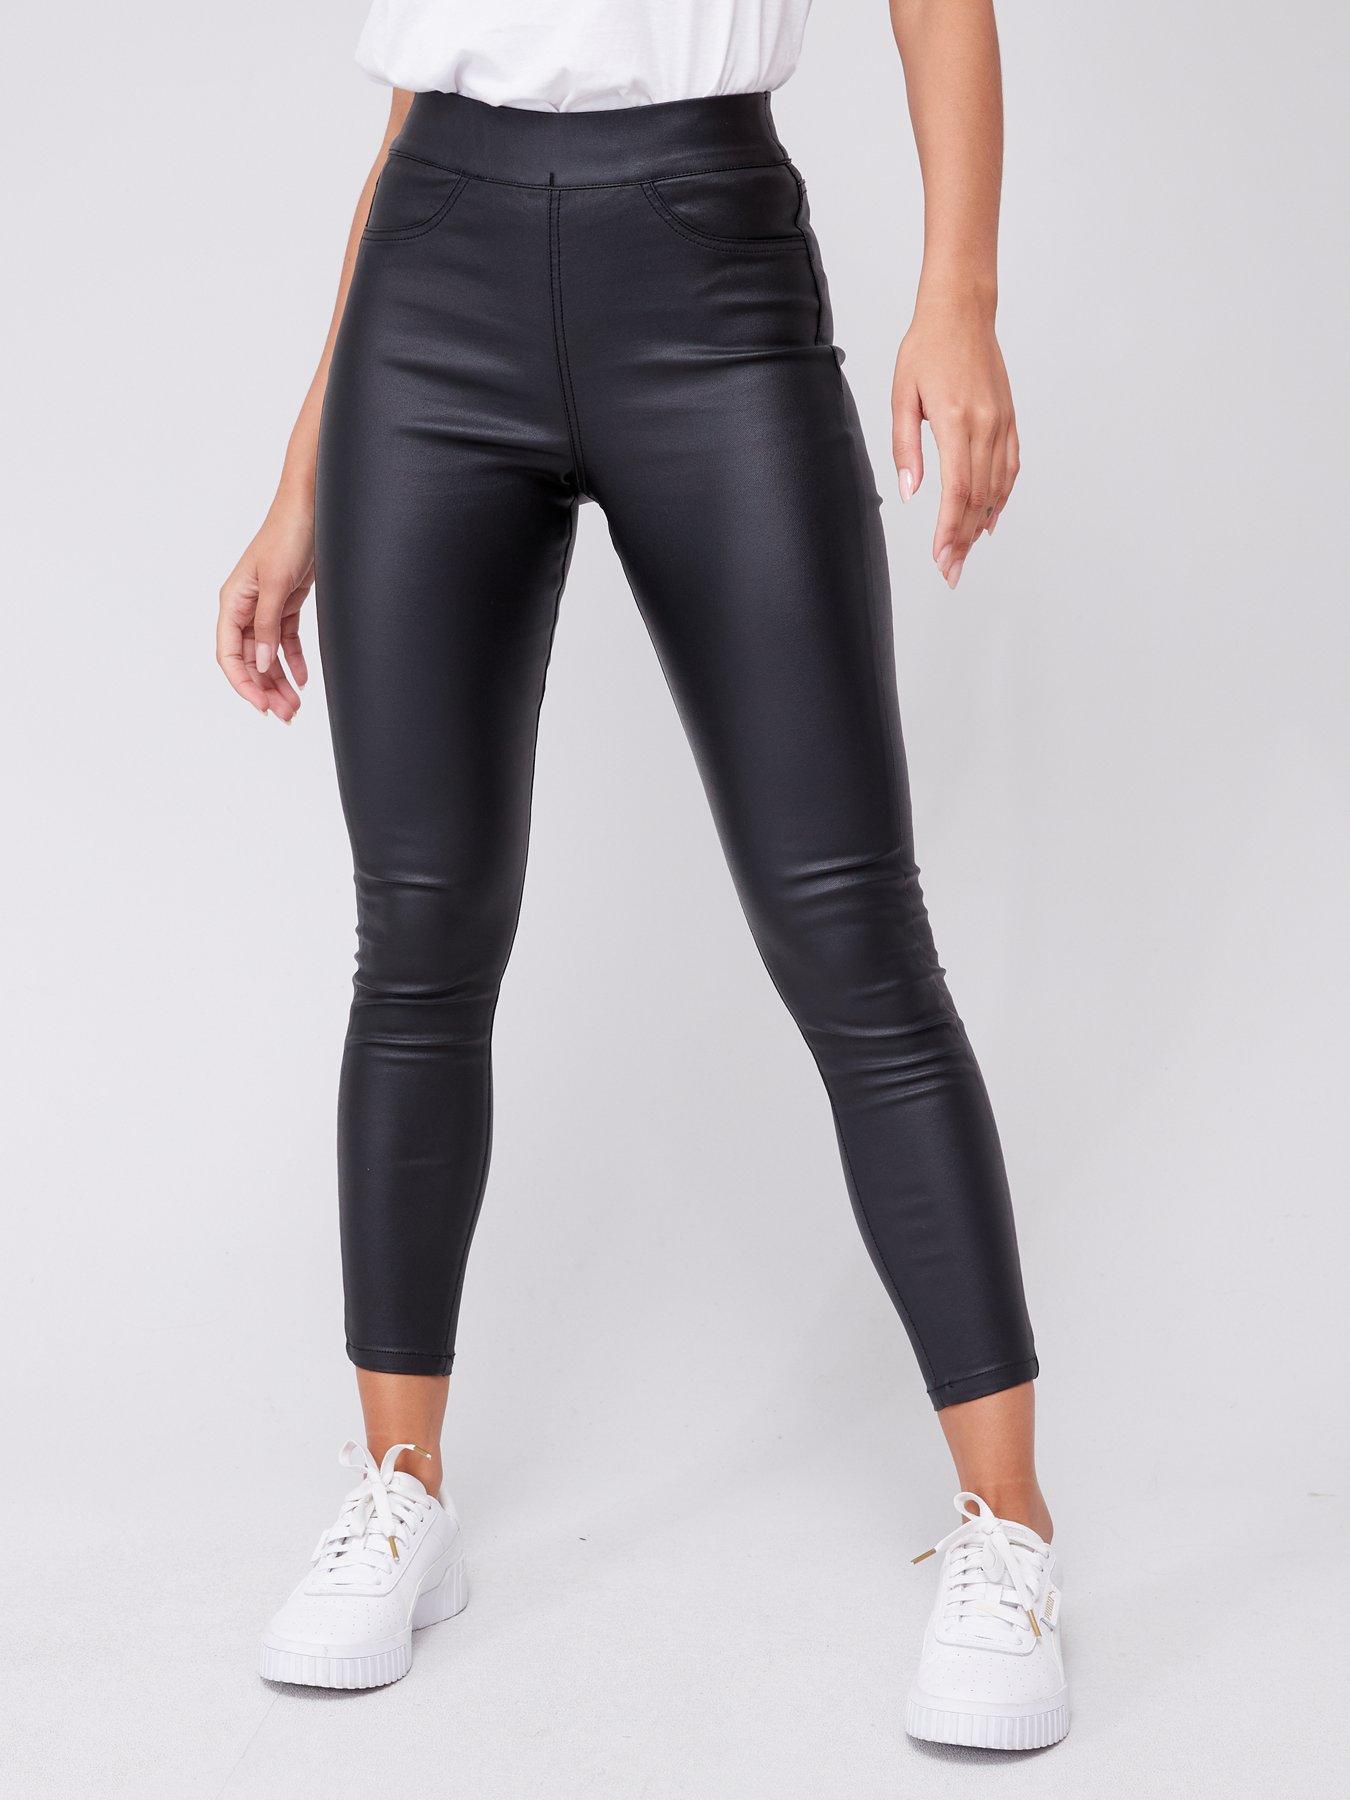 14 of the Best Jeggings That Look Like Jeans | Well+Good